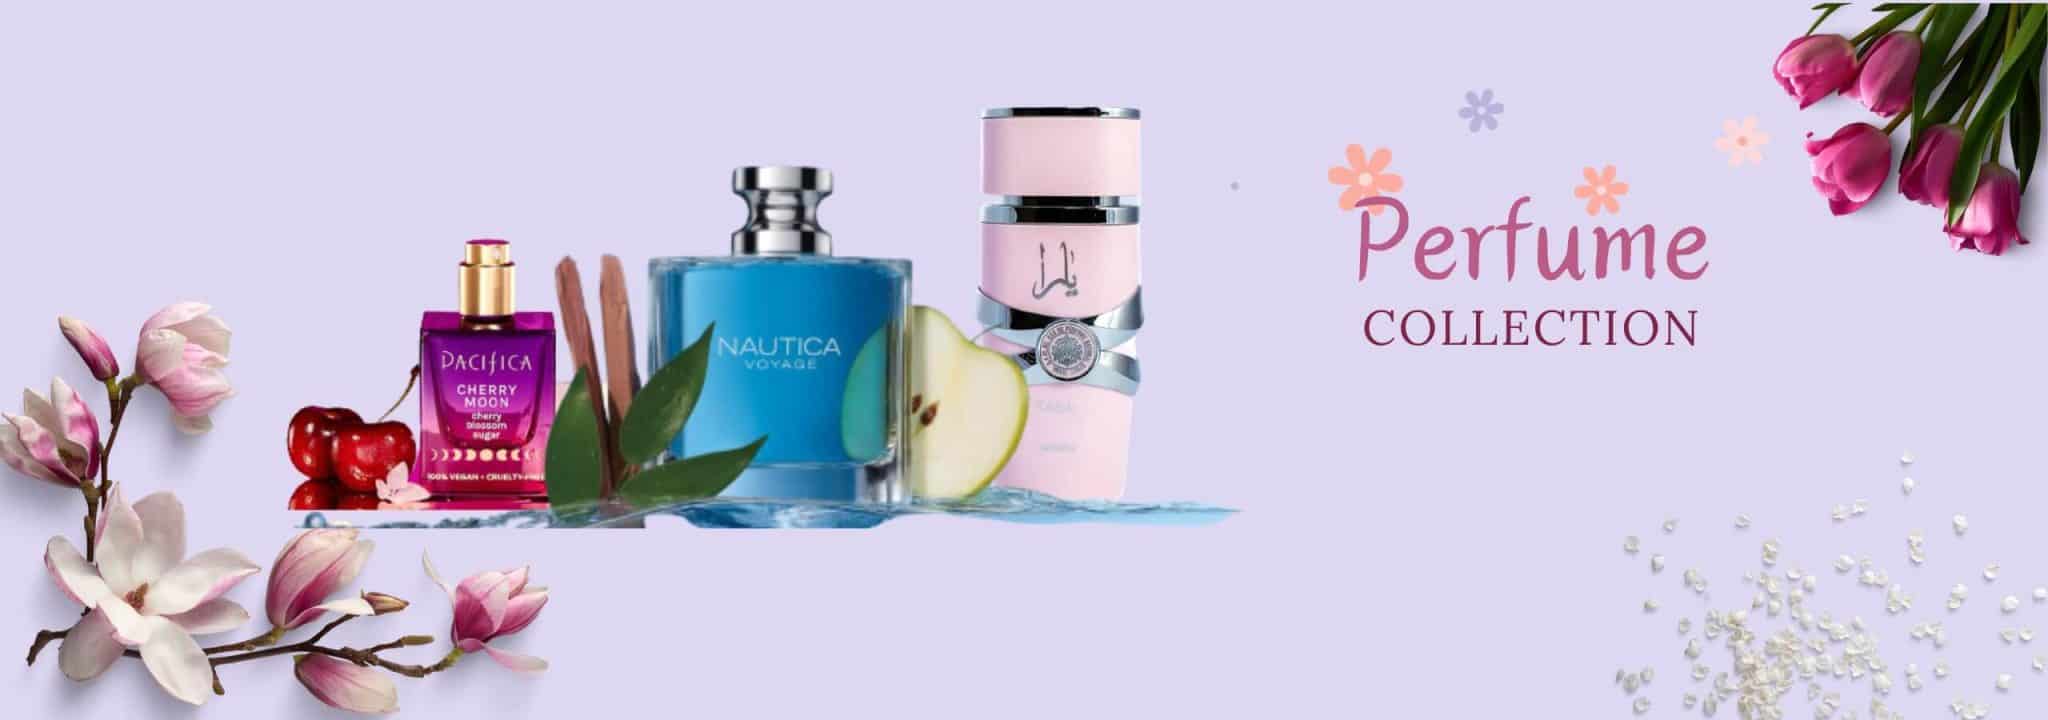 Perfume collection for women